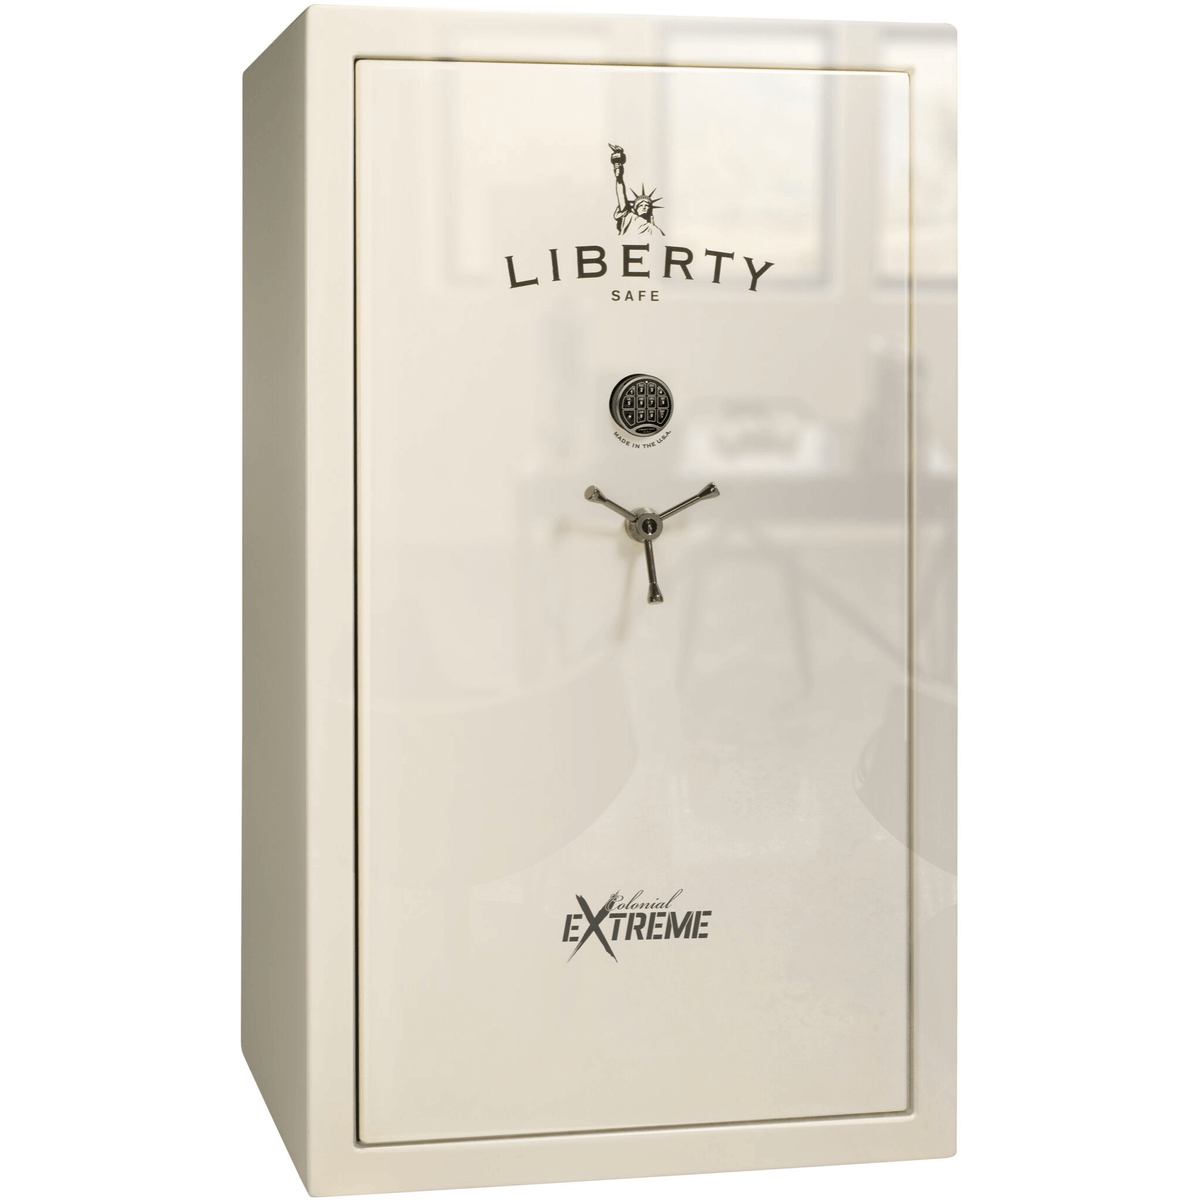 Liberty Colonial 50 Extreme Safe in White Gloss with Black Chrome Electronic Lock.